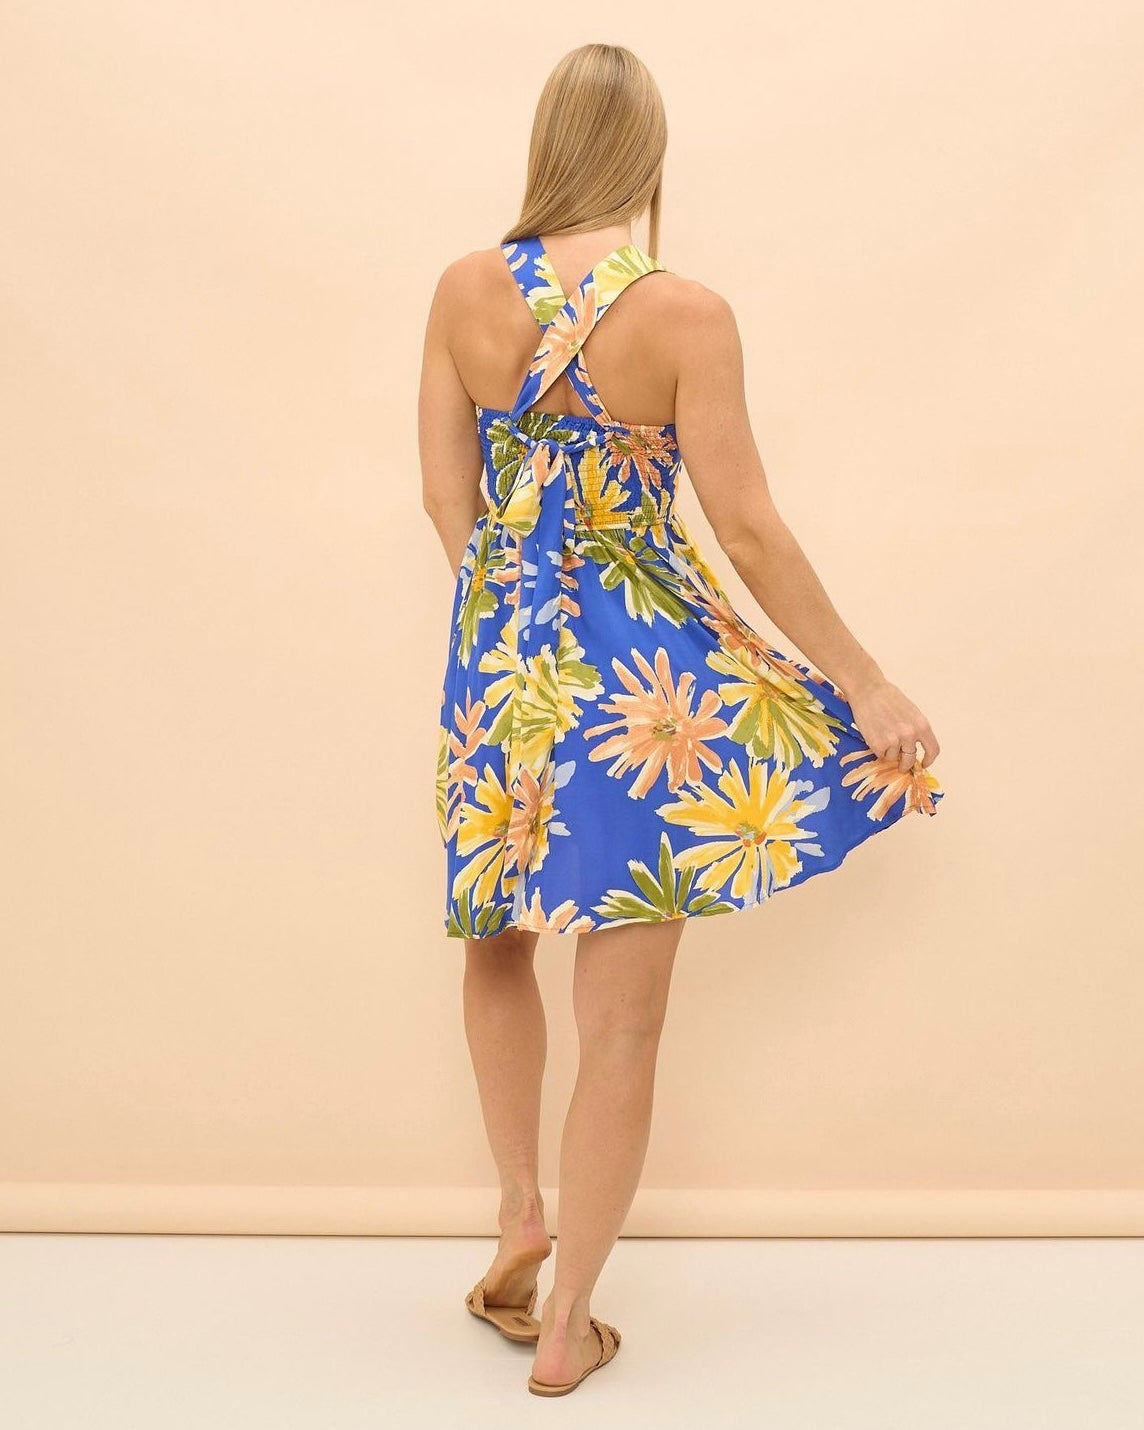 Mae Dress: This sweet little summer dress will brighten the day of everyone around you
Features:

Shirred panels at side for adjustable bust
Convertible back - wear it in a mul - Ciao Bella Dresses - Iris Maxi